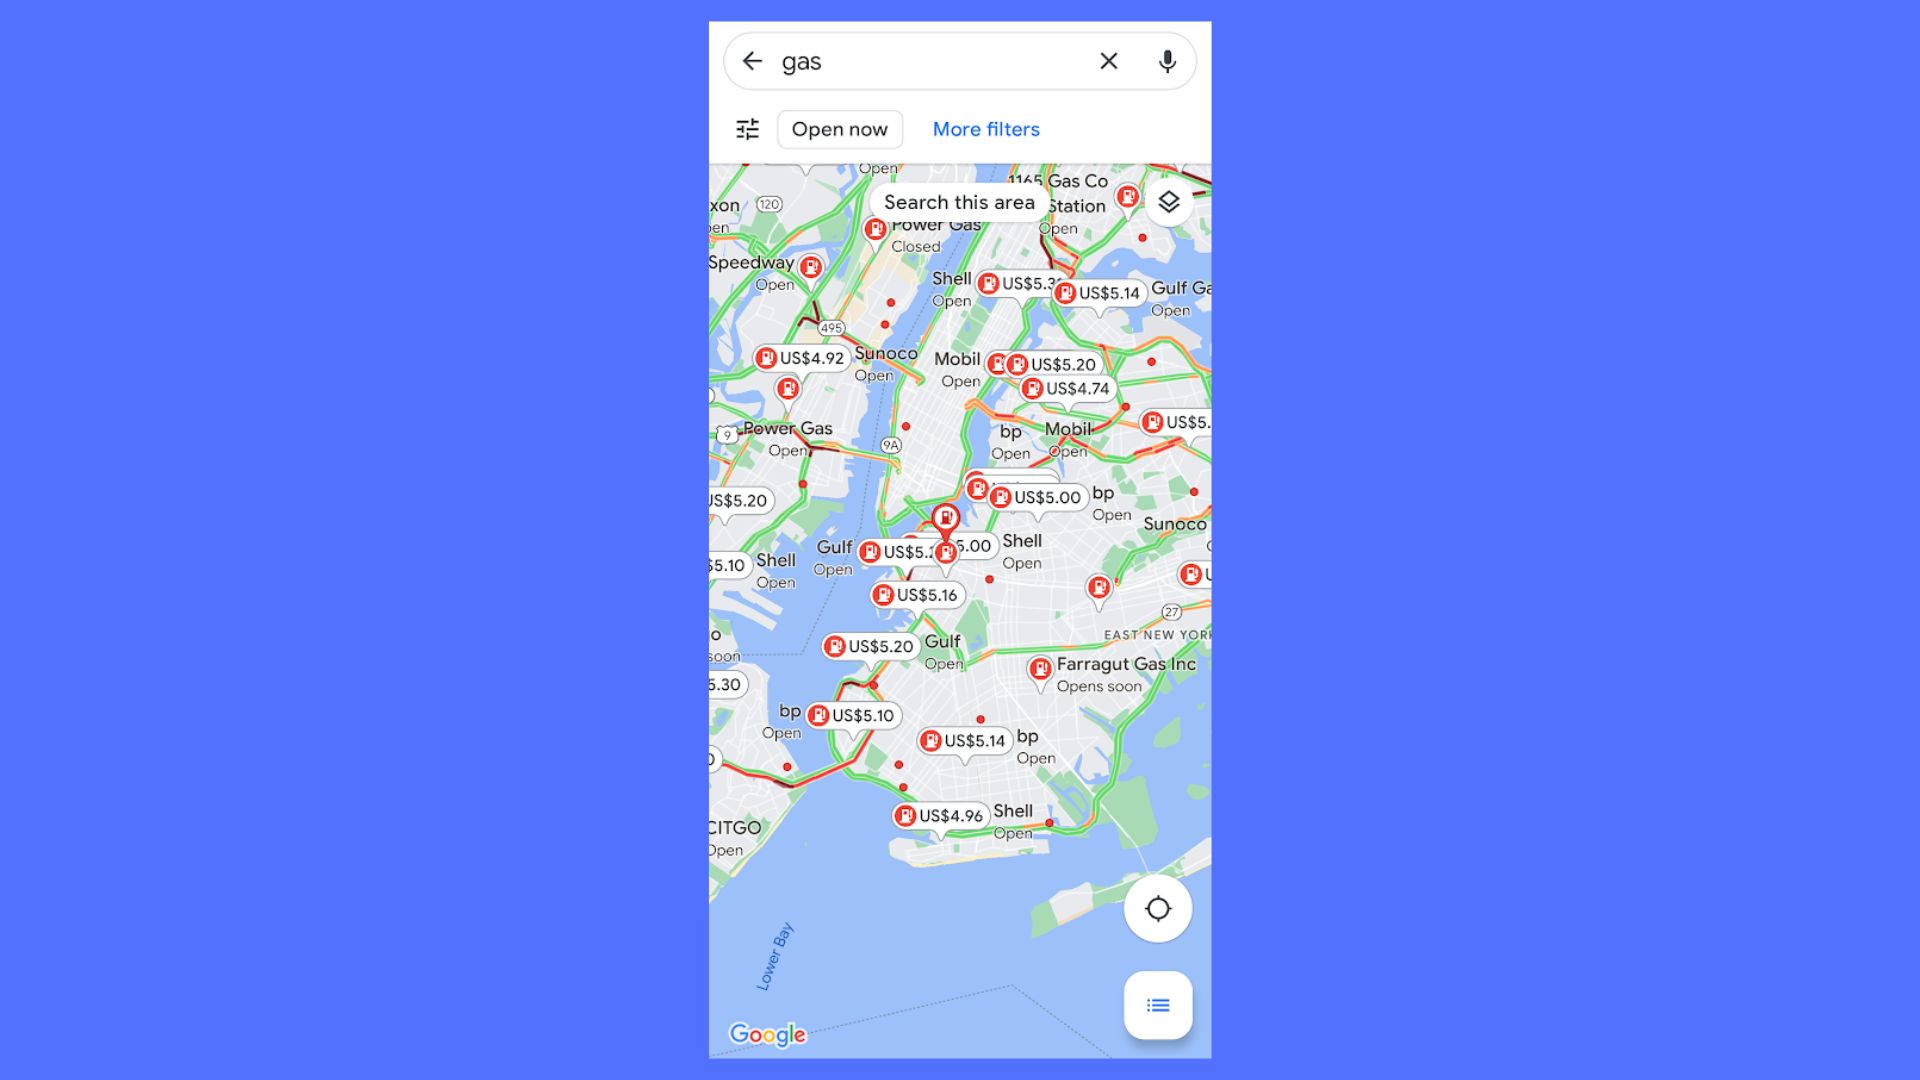 New York fuel prices as shown on Google Maps